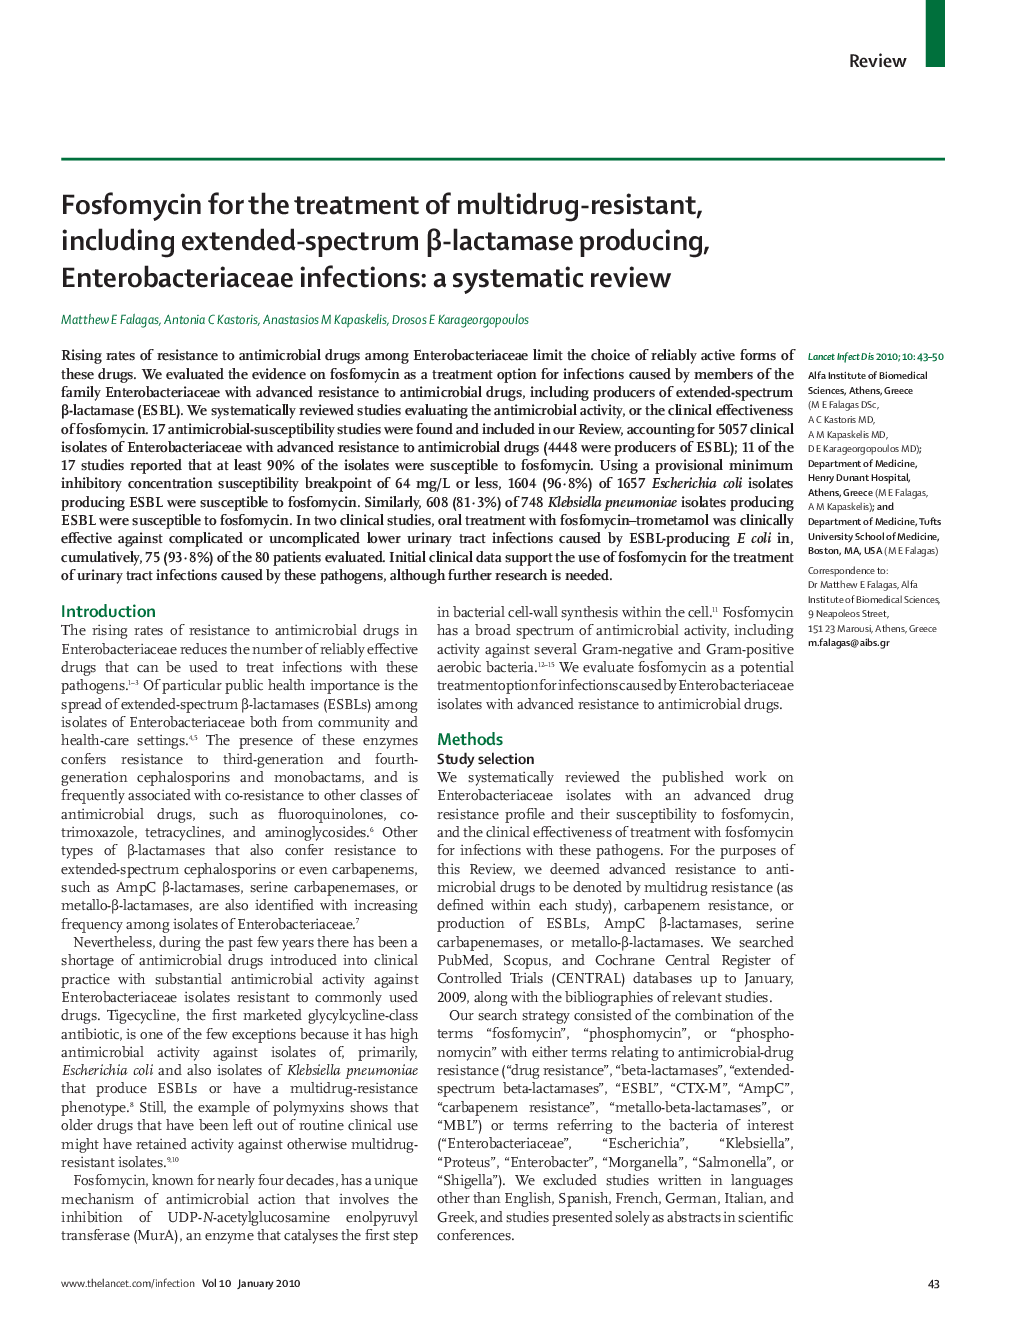 Fosfomycin for the treatment of multidrug-resistant, including extended-spectrum β-lactamase producing, Enterobacteriaceae infections: a systematic review